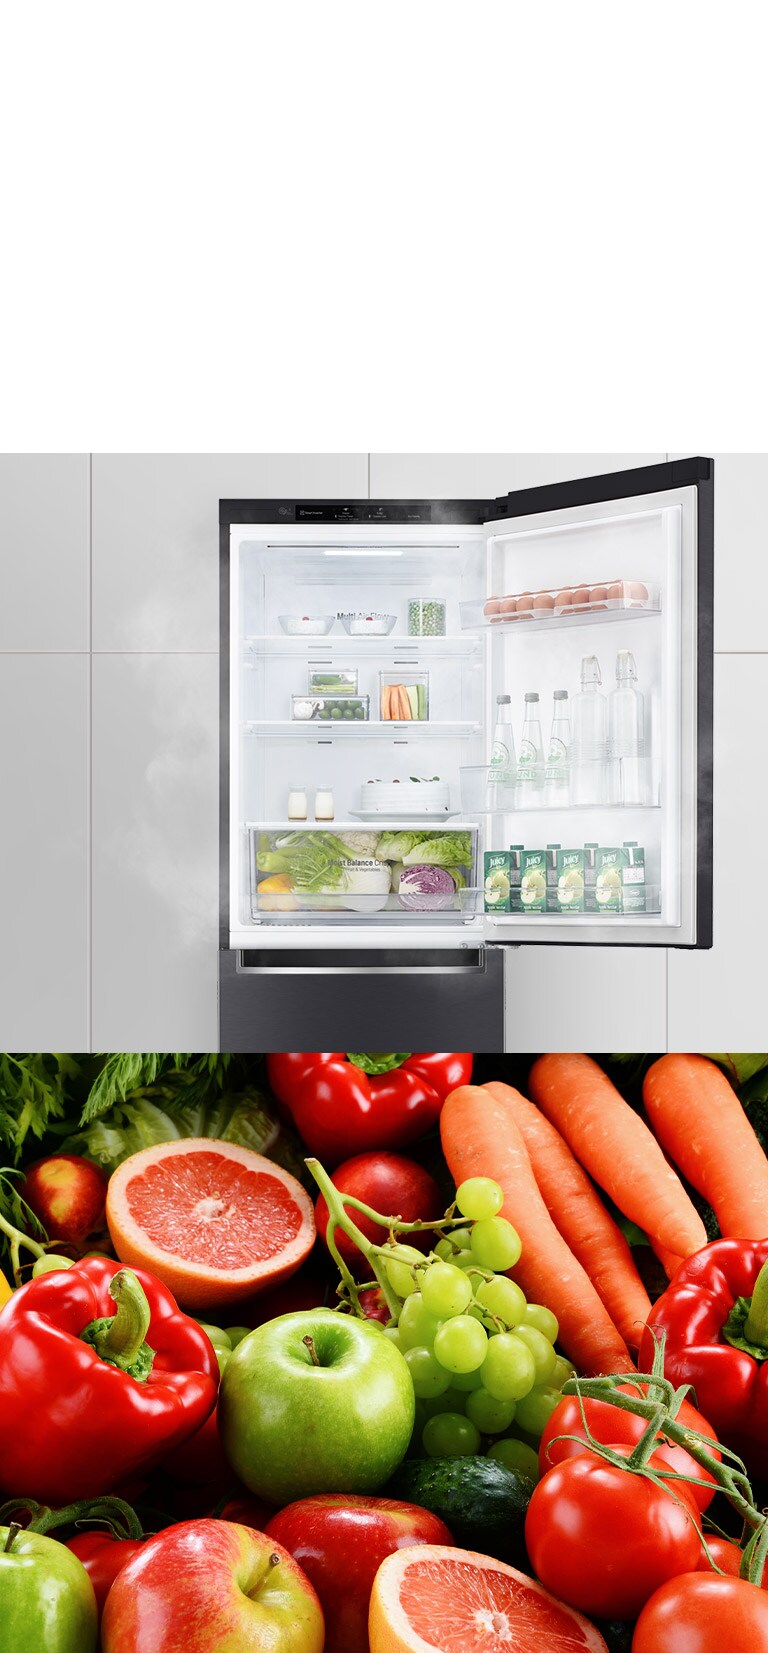 The first image shows the refrigerator with the top door open and filled with drinks and produce. The second image shows bright and vivid fruits and vegetables in a group.